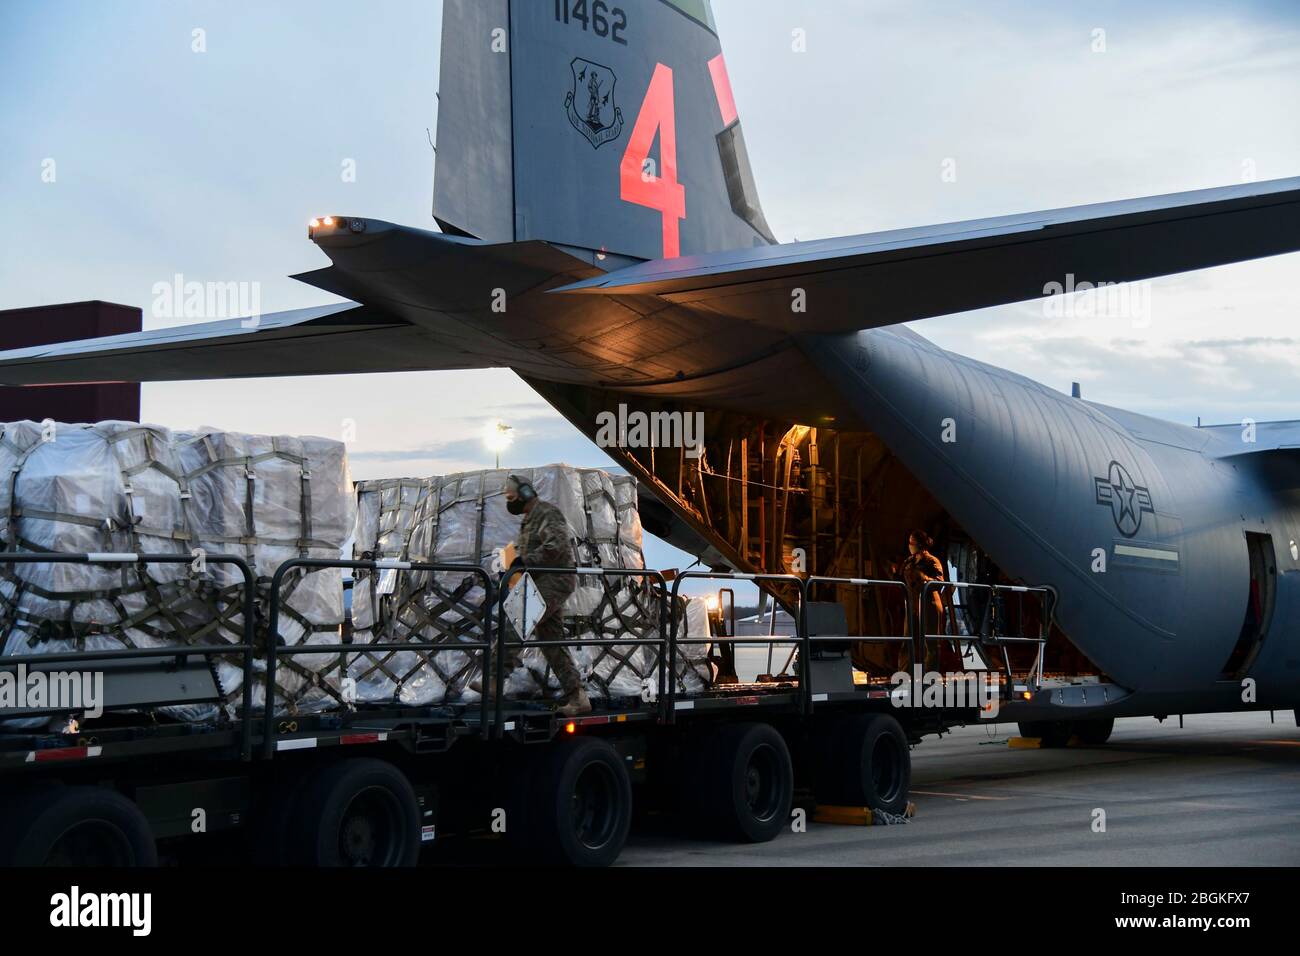 Airmen from the 146th Airlift Wing, California Air National Guard in Oxnard, CA, deliver 200 ventilators to members of the 105th AW, April 7, 2020, at Stewart Air National Guard Base, Newburgh, NY. The use of the C-130J Super Hercules, along with the NY Army National Guard, facilitated the shipment of medical equipment, which will support the ongoing COVID-19 medical treatments being conducted in the New York and New Jersey areas (U.S. Air Force Photo by SrA Jonathan Lane/Released). Stock Photo